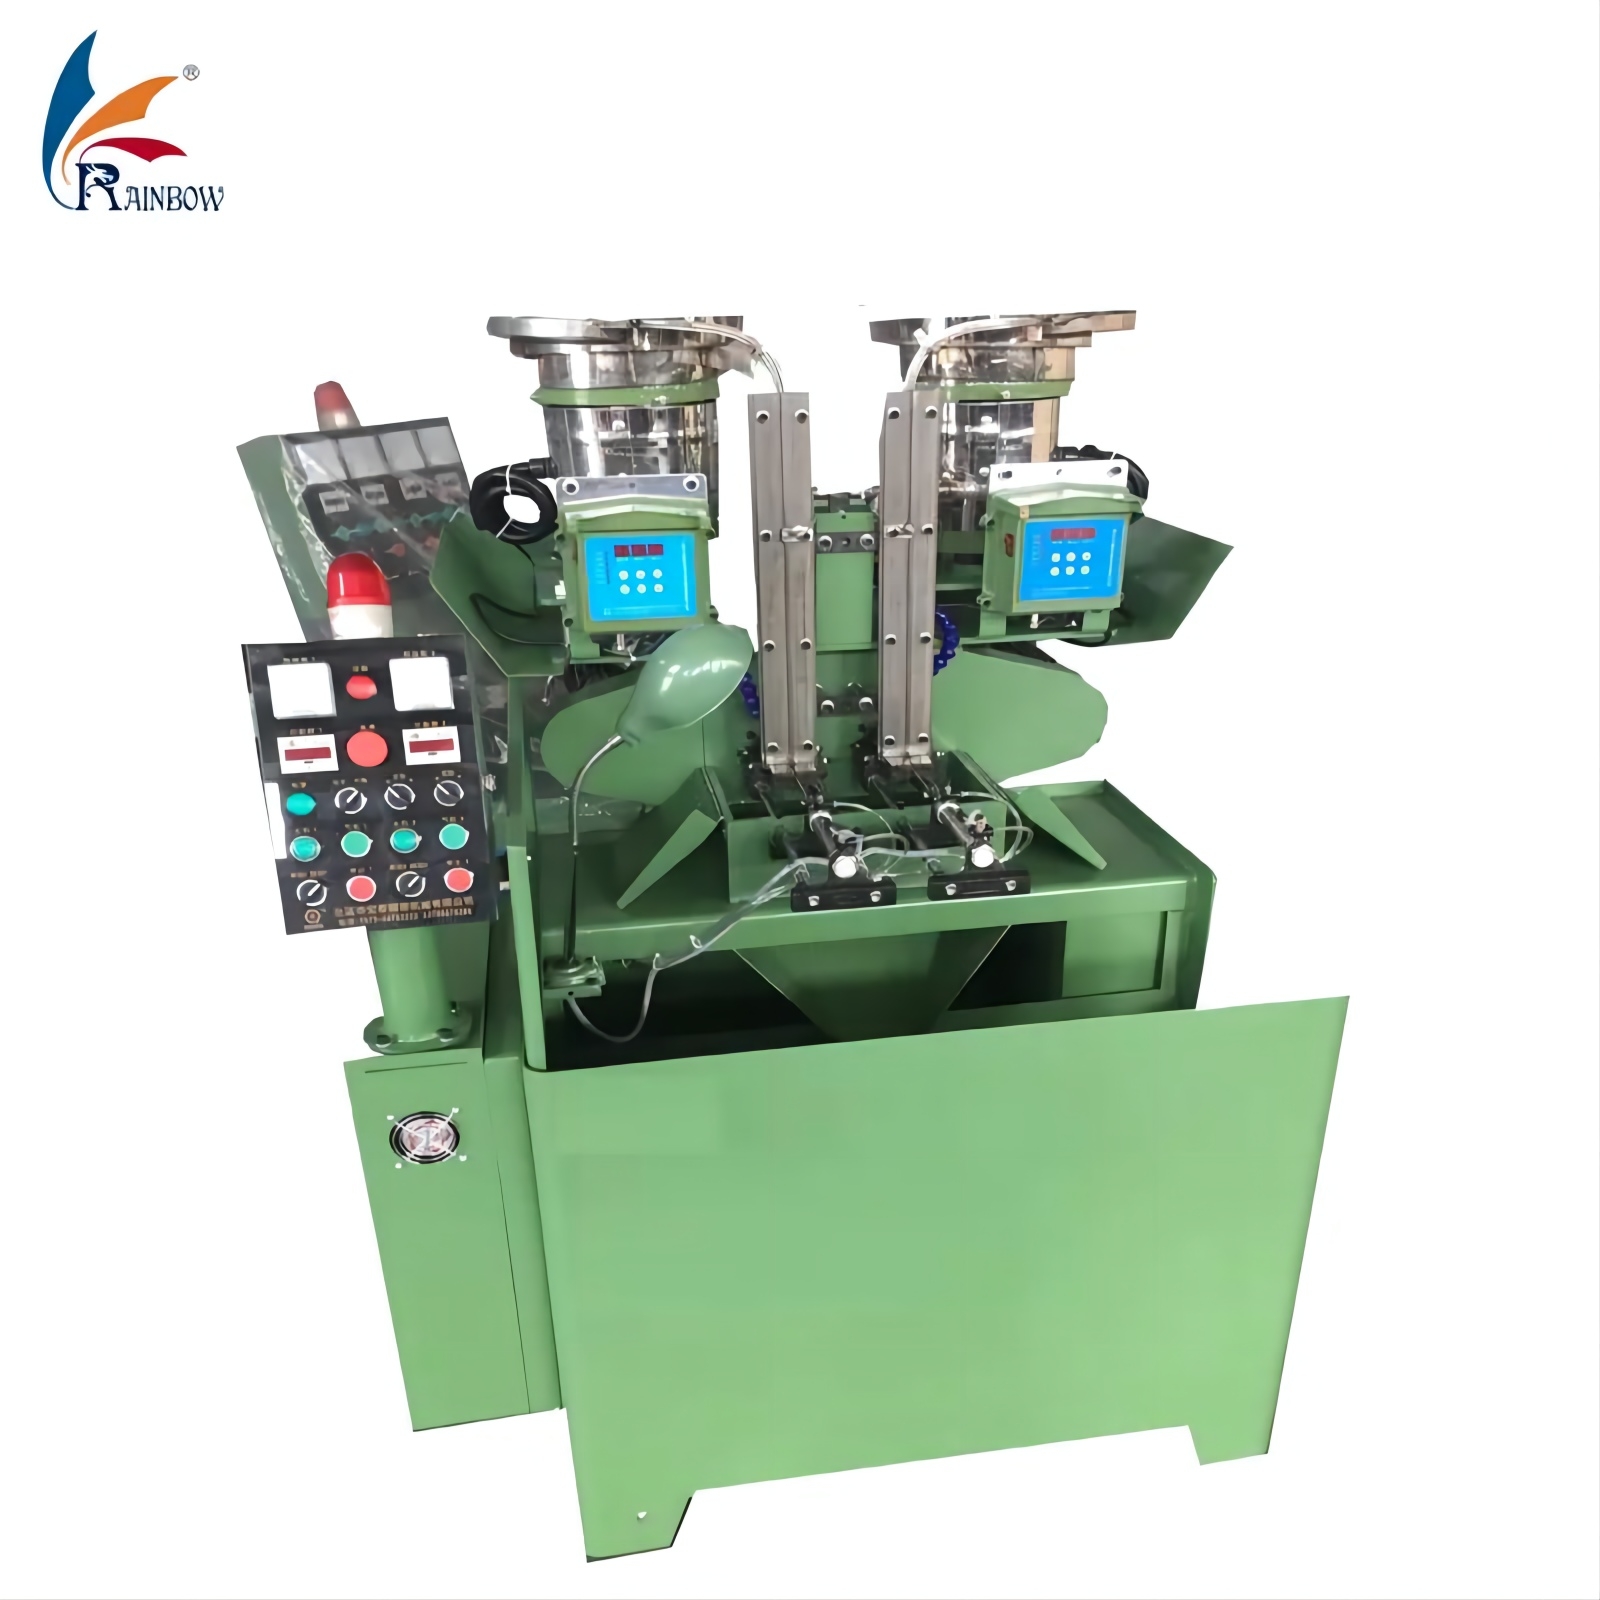 Rainbow High Speed 2/4 Spindle Nut Tapping Machine